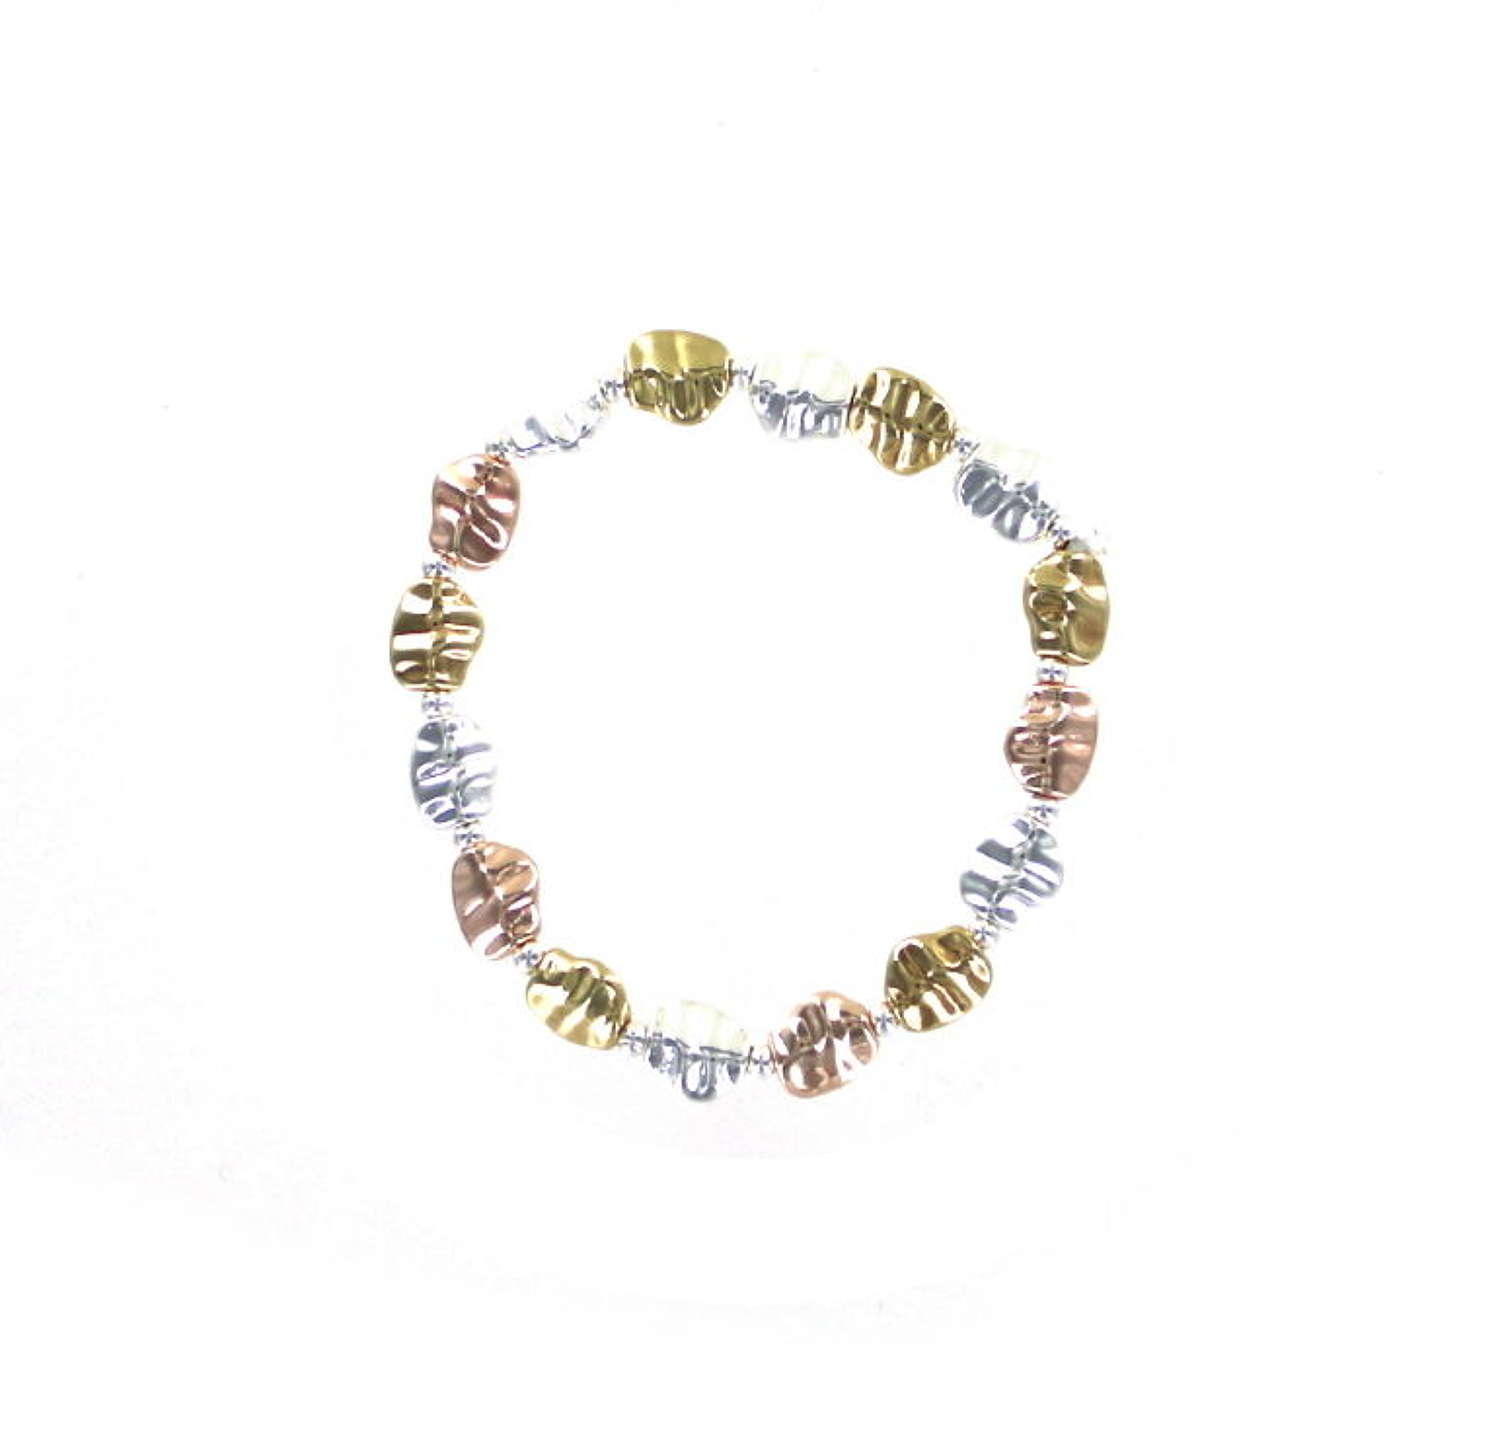 Silver and gold tone textured metal bead elasticated bracelet.